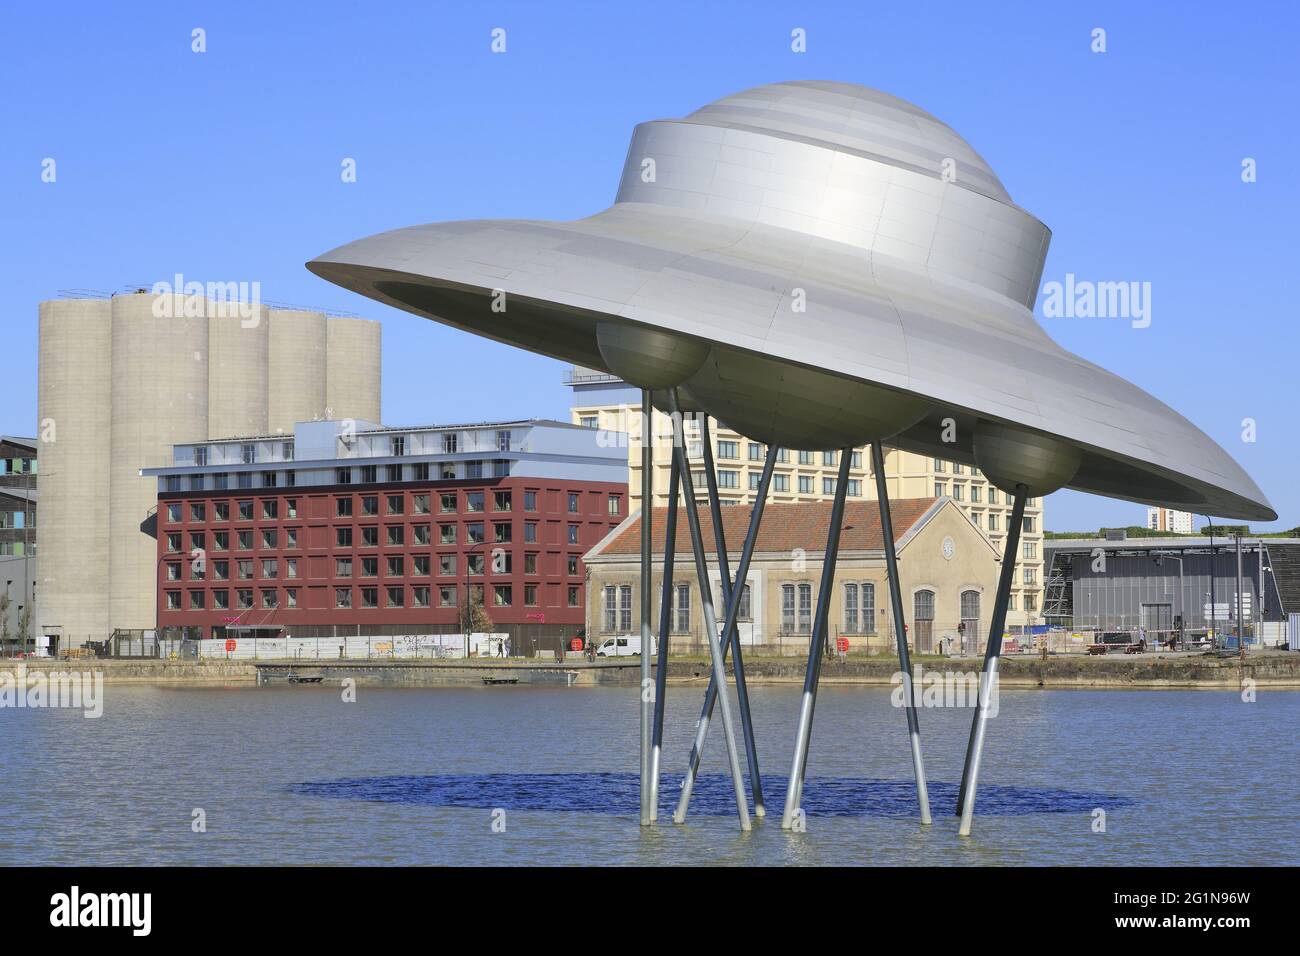 France, Gironde, Bordeaux, Bacalan district, Bassins � Flot, basin n � 1, Spaceship of the British artist Suzanne Treister installed in 2018 Stock Photo